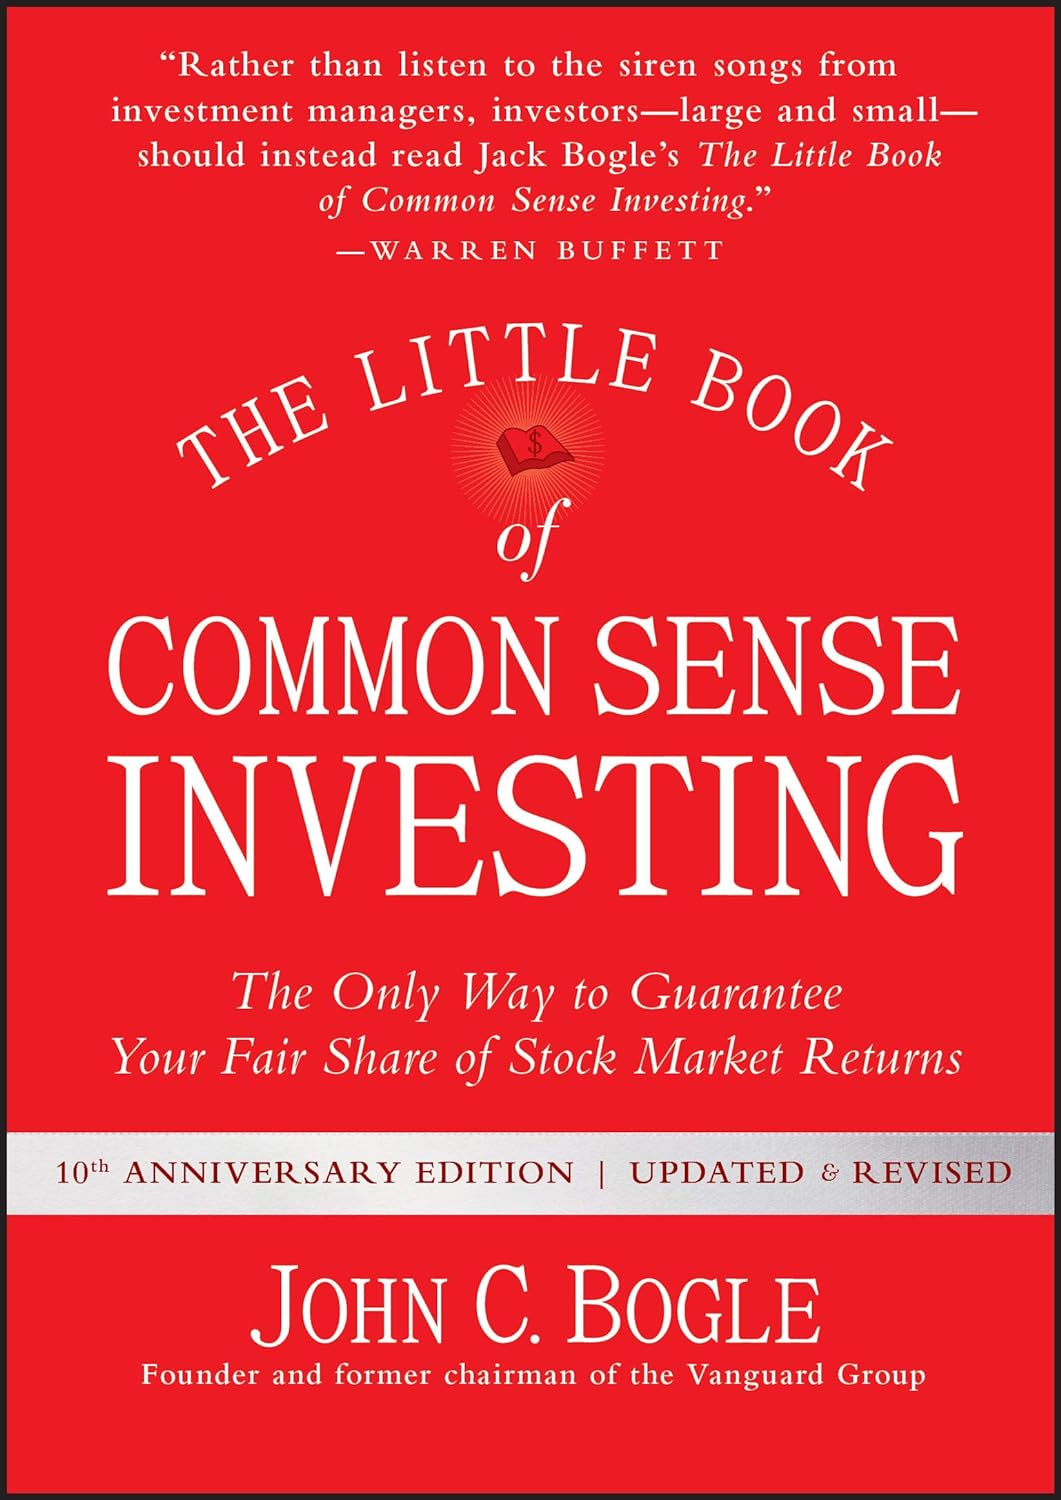 simple trading book | The Little Book of Common Sense Investing: The Only Way to Guarantee Your Fair Share of Stock Market Returns, by John C. Bogle